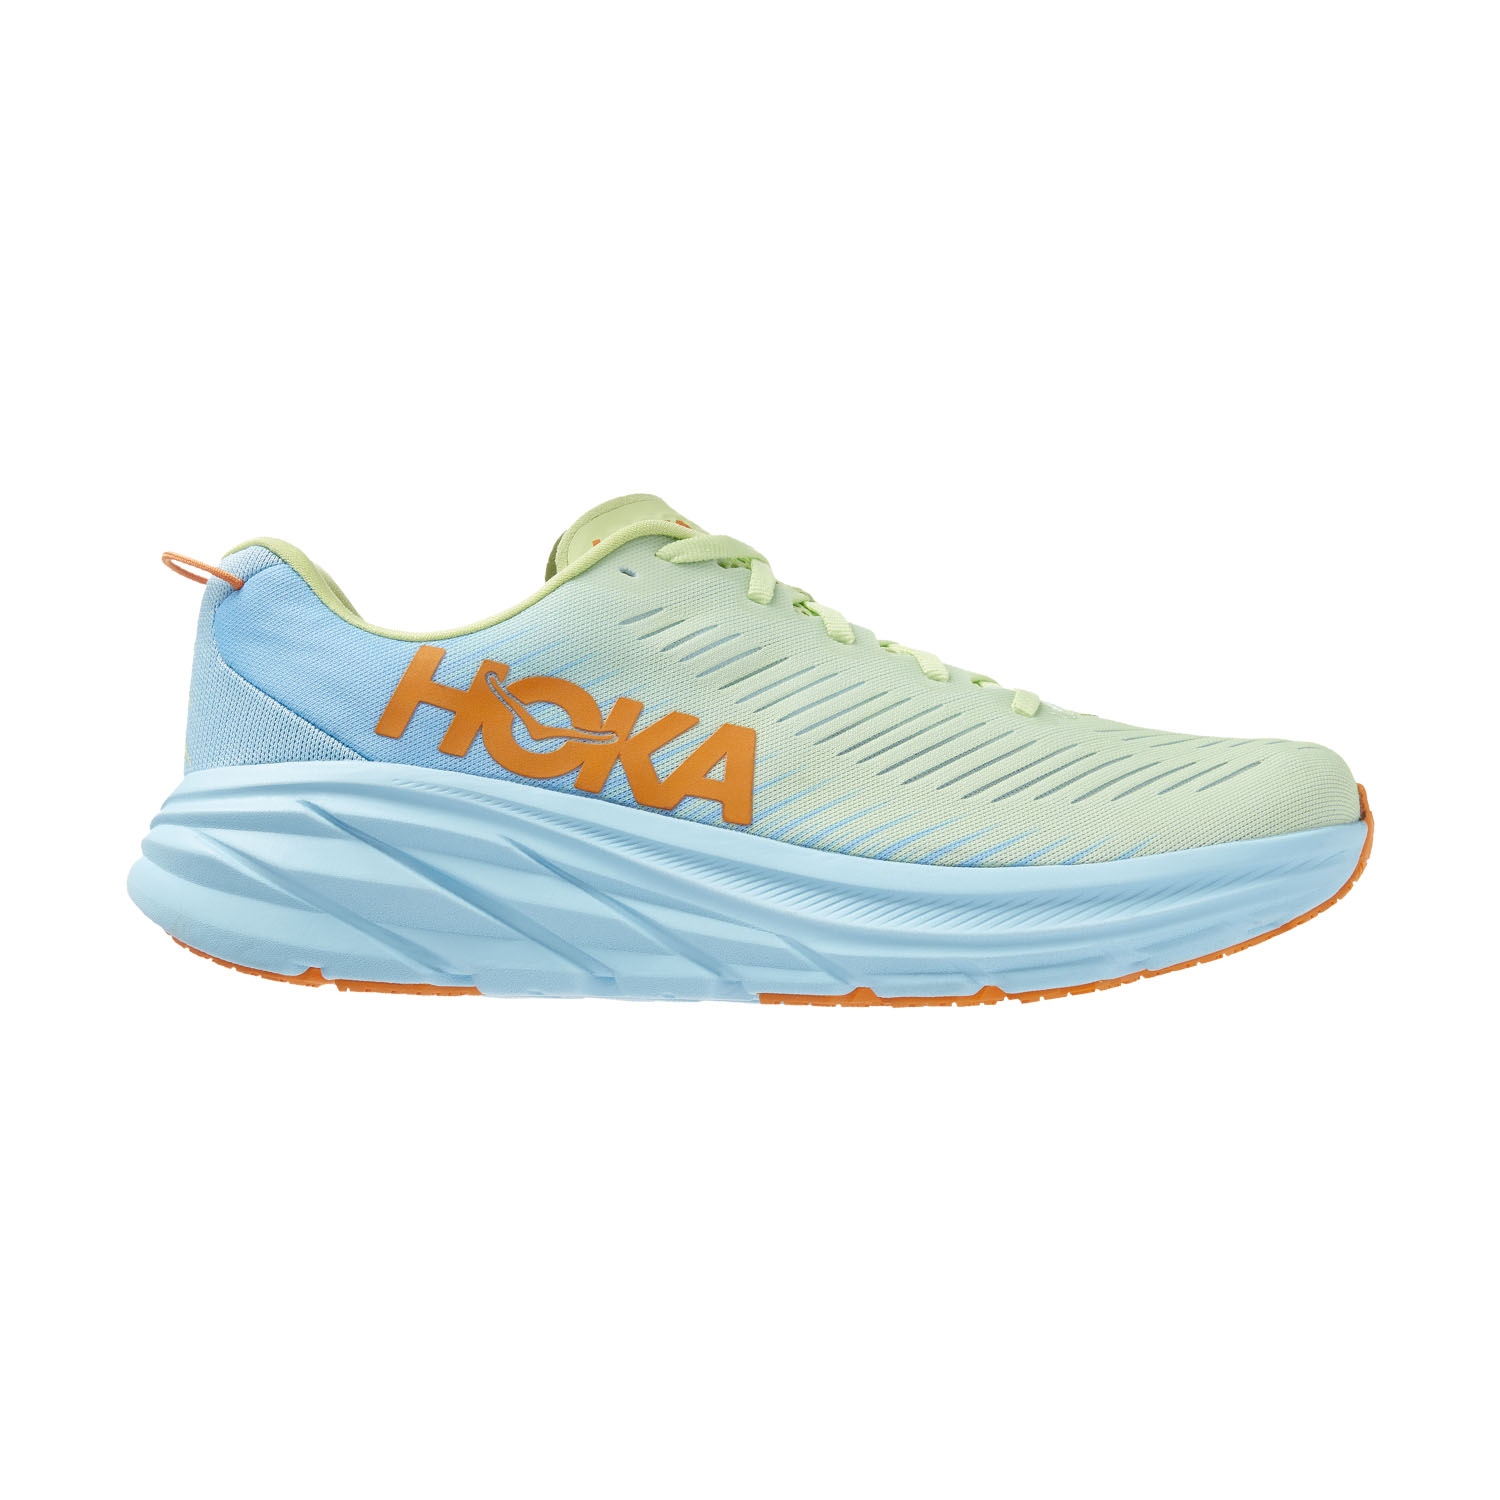 Hoka One One Rincon 3 - Butterfly/Summer Song